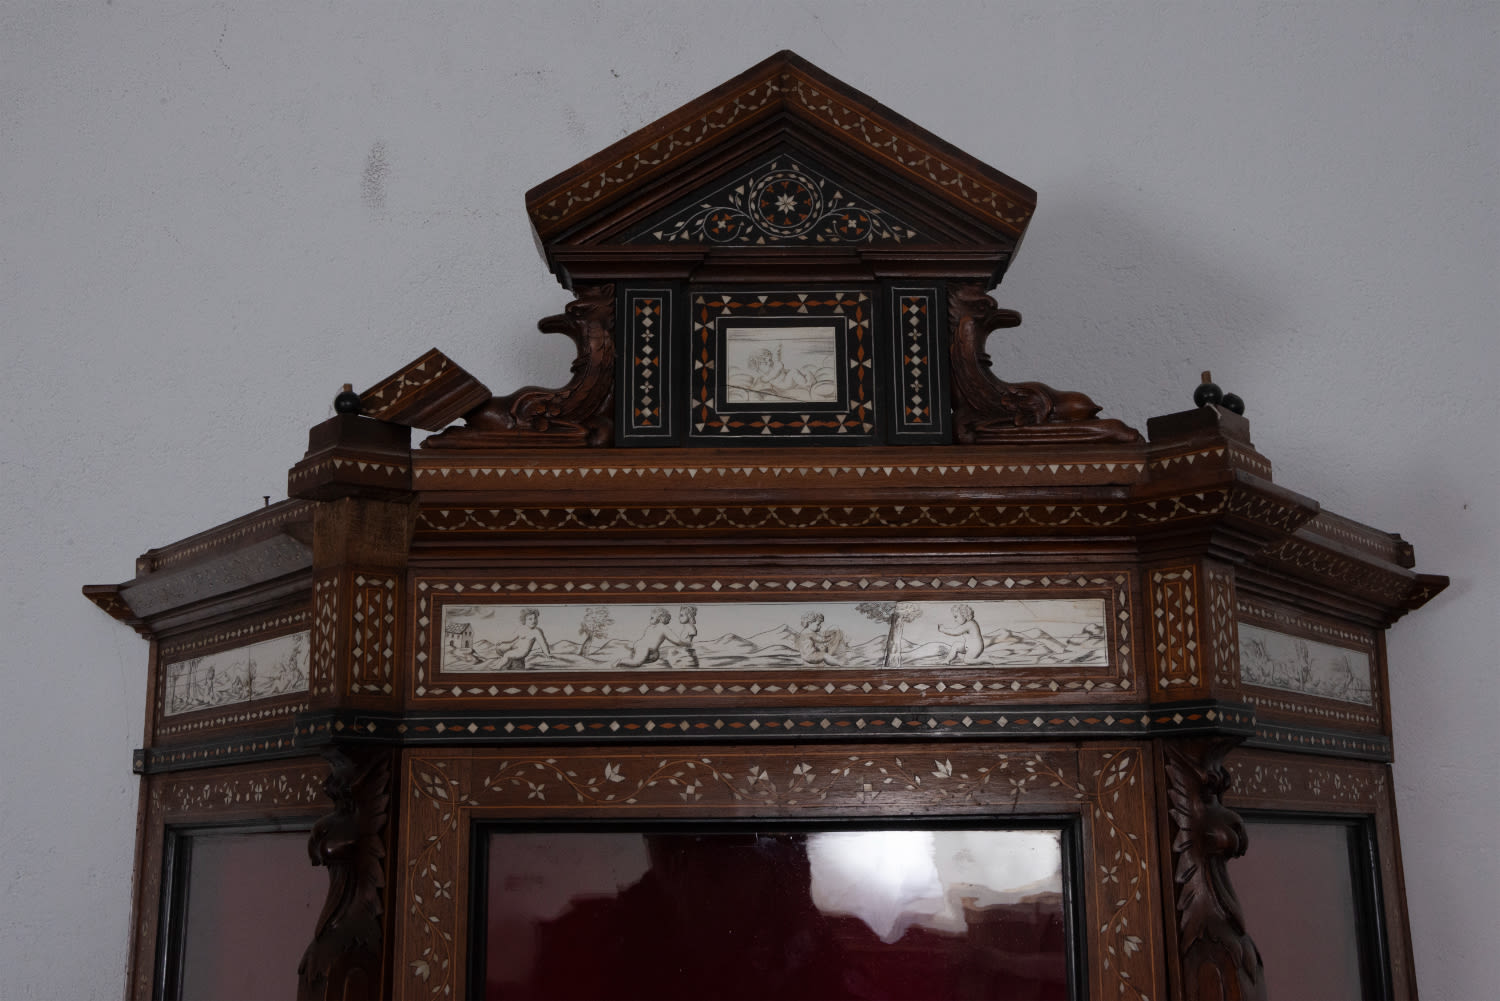 Bone inlaid display case, possibly 19th century French or Venetian work - Image 2 of 5